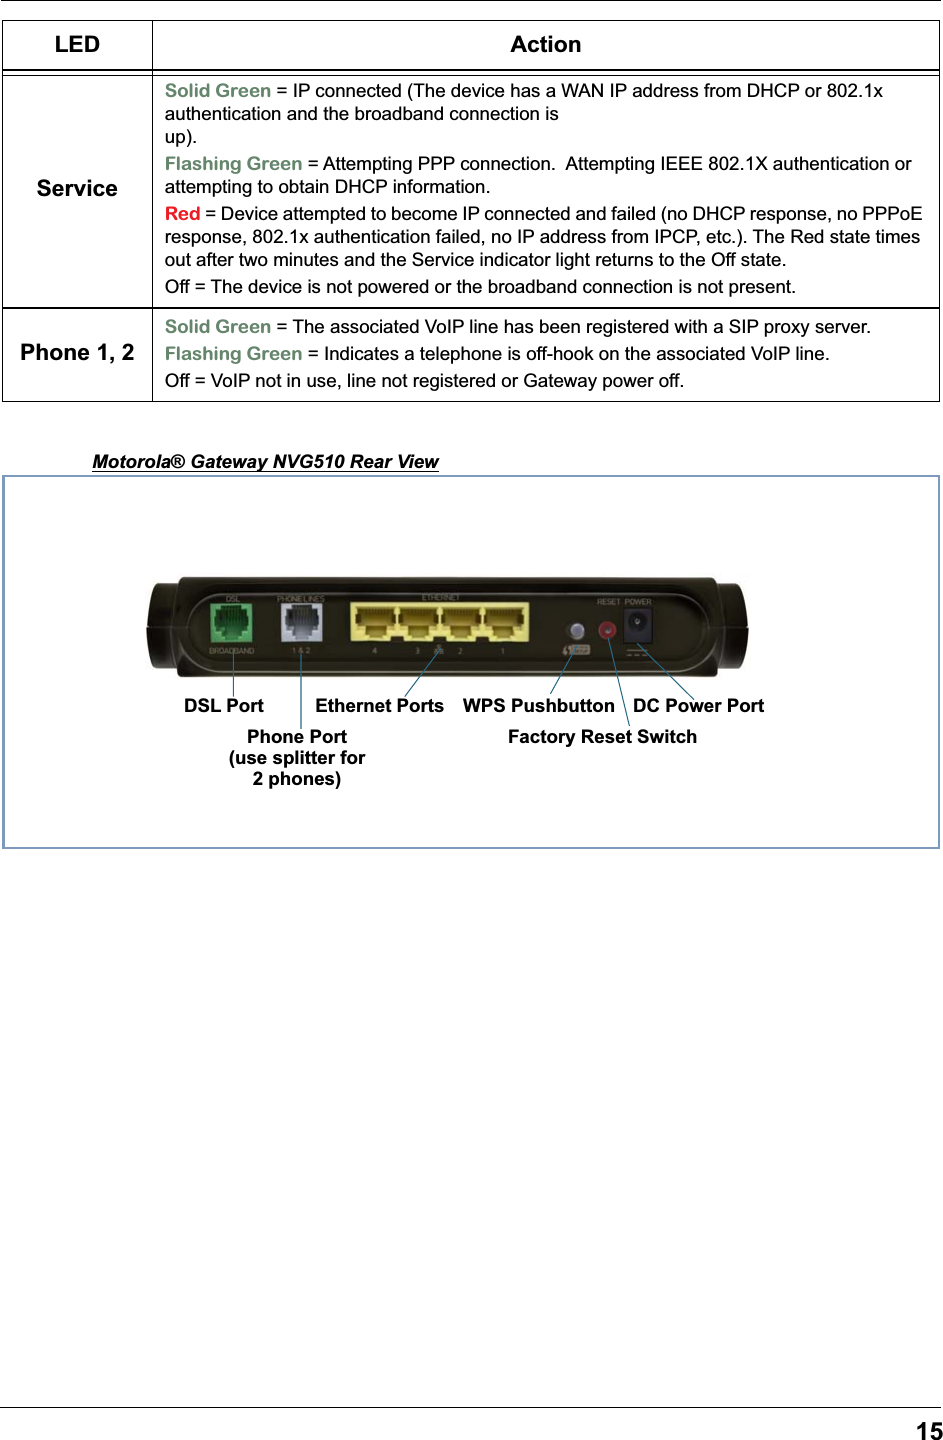 15Motorola® Gateway NVG510 Rear ViewServiceSolid Green = IP connected (The device has a WAN IP address from DHCP or 802.1x authentication and the broadband connection is up).                                                                                                Flashing Green = Attempting PPP connection.  Attempting IEEE 802.1X authentication or attempting to obtain DHCP information.Red = Device attempted to become IP connected and failed (no DHCP response, no PPPoE response, 802.1x authentication failed, no IP address from IPCP, etc.). The Red state times out after two minutes and the Service indicator light returns to the Off state. Off = The device is not powered or the broadband connection is not present.Phone 1, 2Solid Green = The associated VoIP line has been registered with a SIP proxy server.Flashing Green = Indicates a telephone is off-hook on the associated VoIP line.Off = VoIP not in use, line not registered or Gateway power off.LED ActionFactory Reset SwitchDC Power PortWPS PushbuttonEthernet PortsPhone Port(use splitter for2 phones)DSL Port